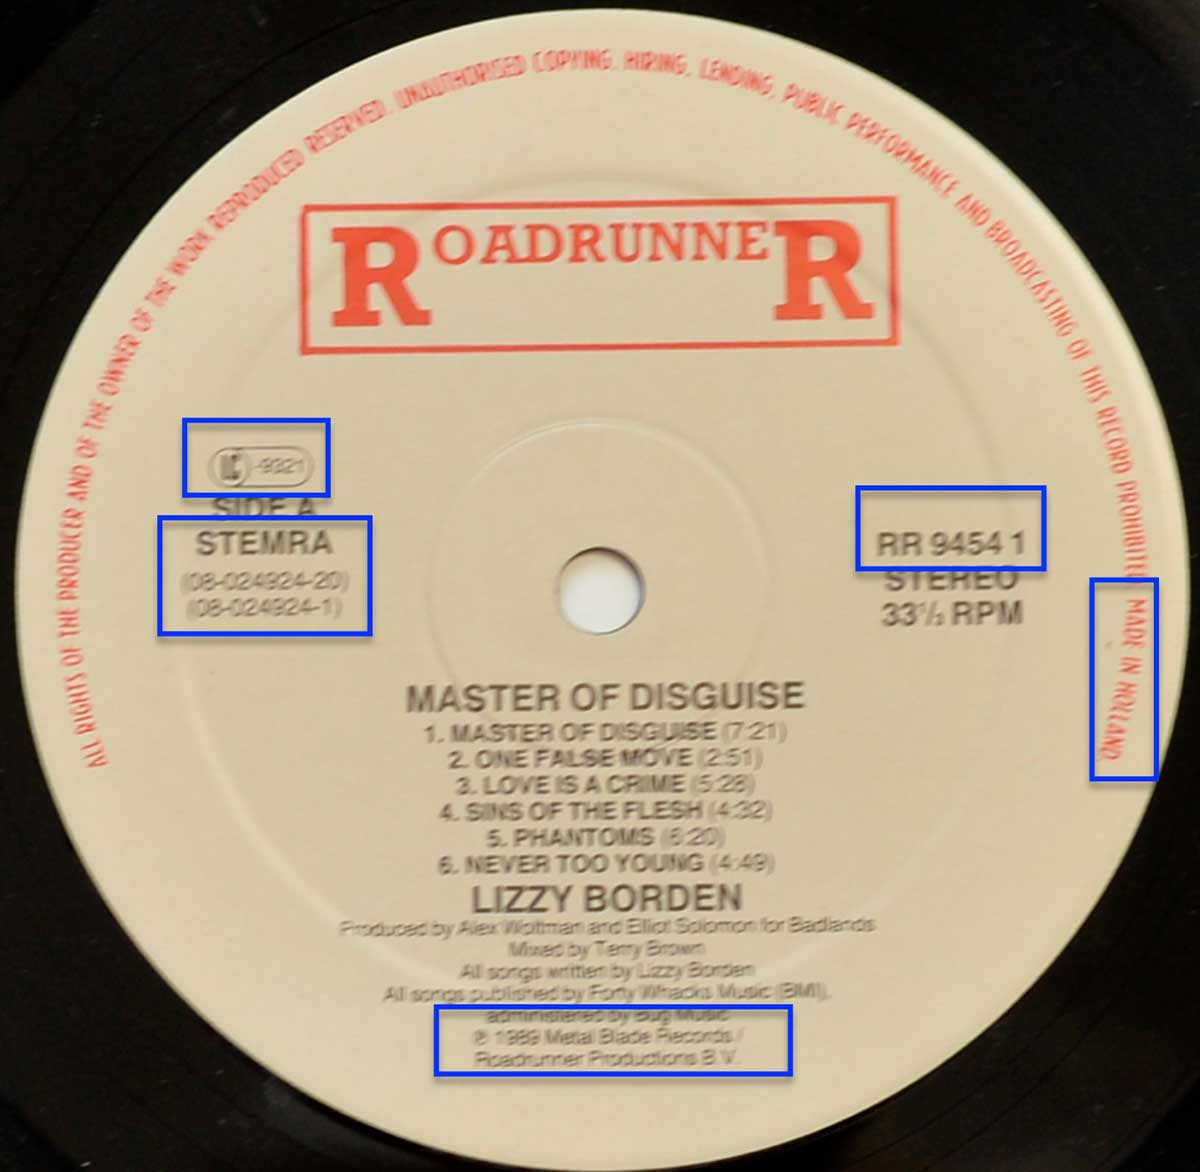 High Resolution Photo of the enlarged label LIZZY BORDEN Master of Disguise https://vinyl-records.nl